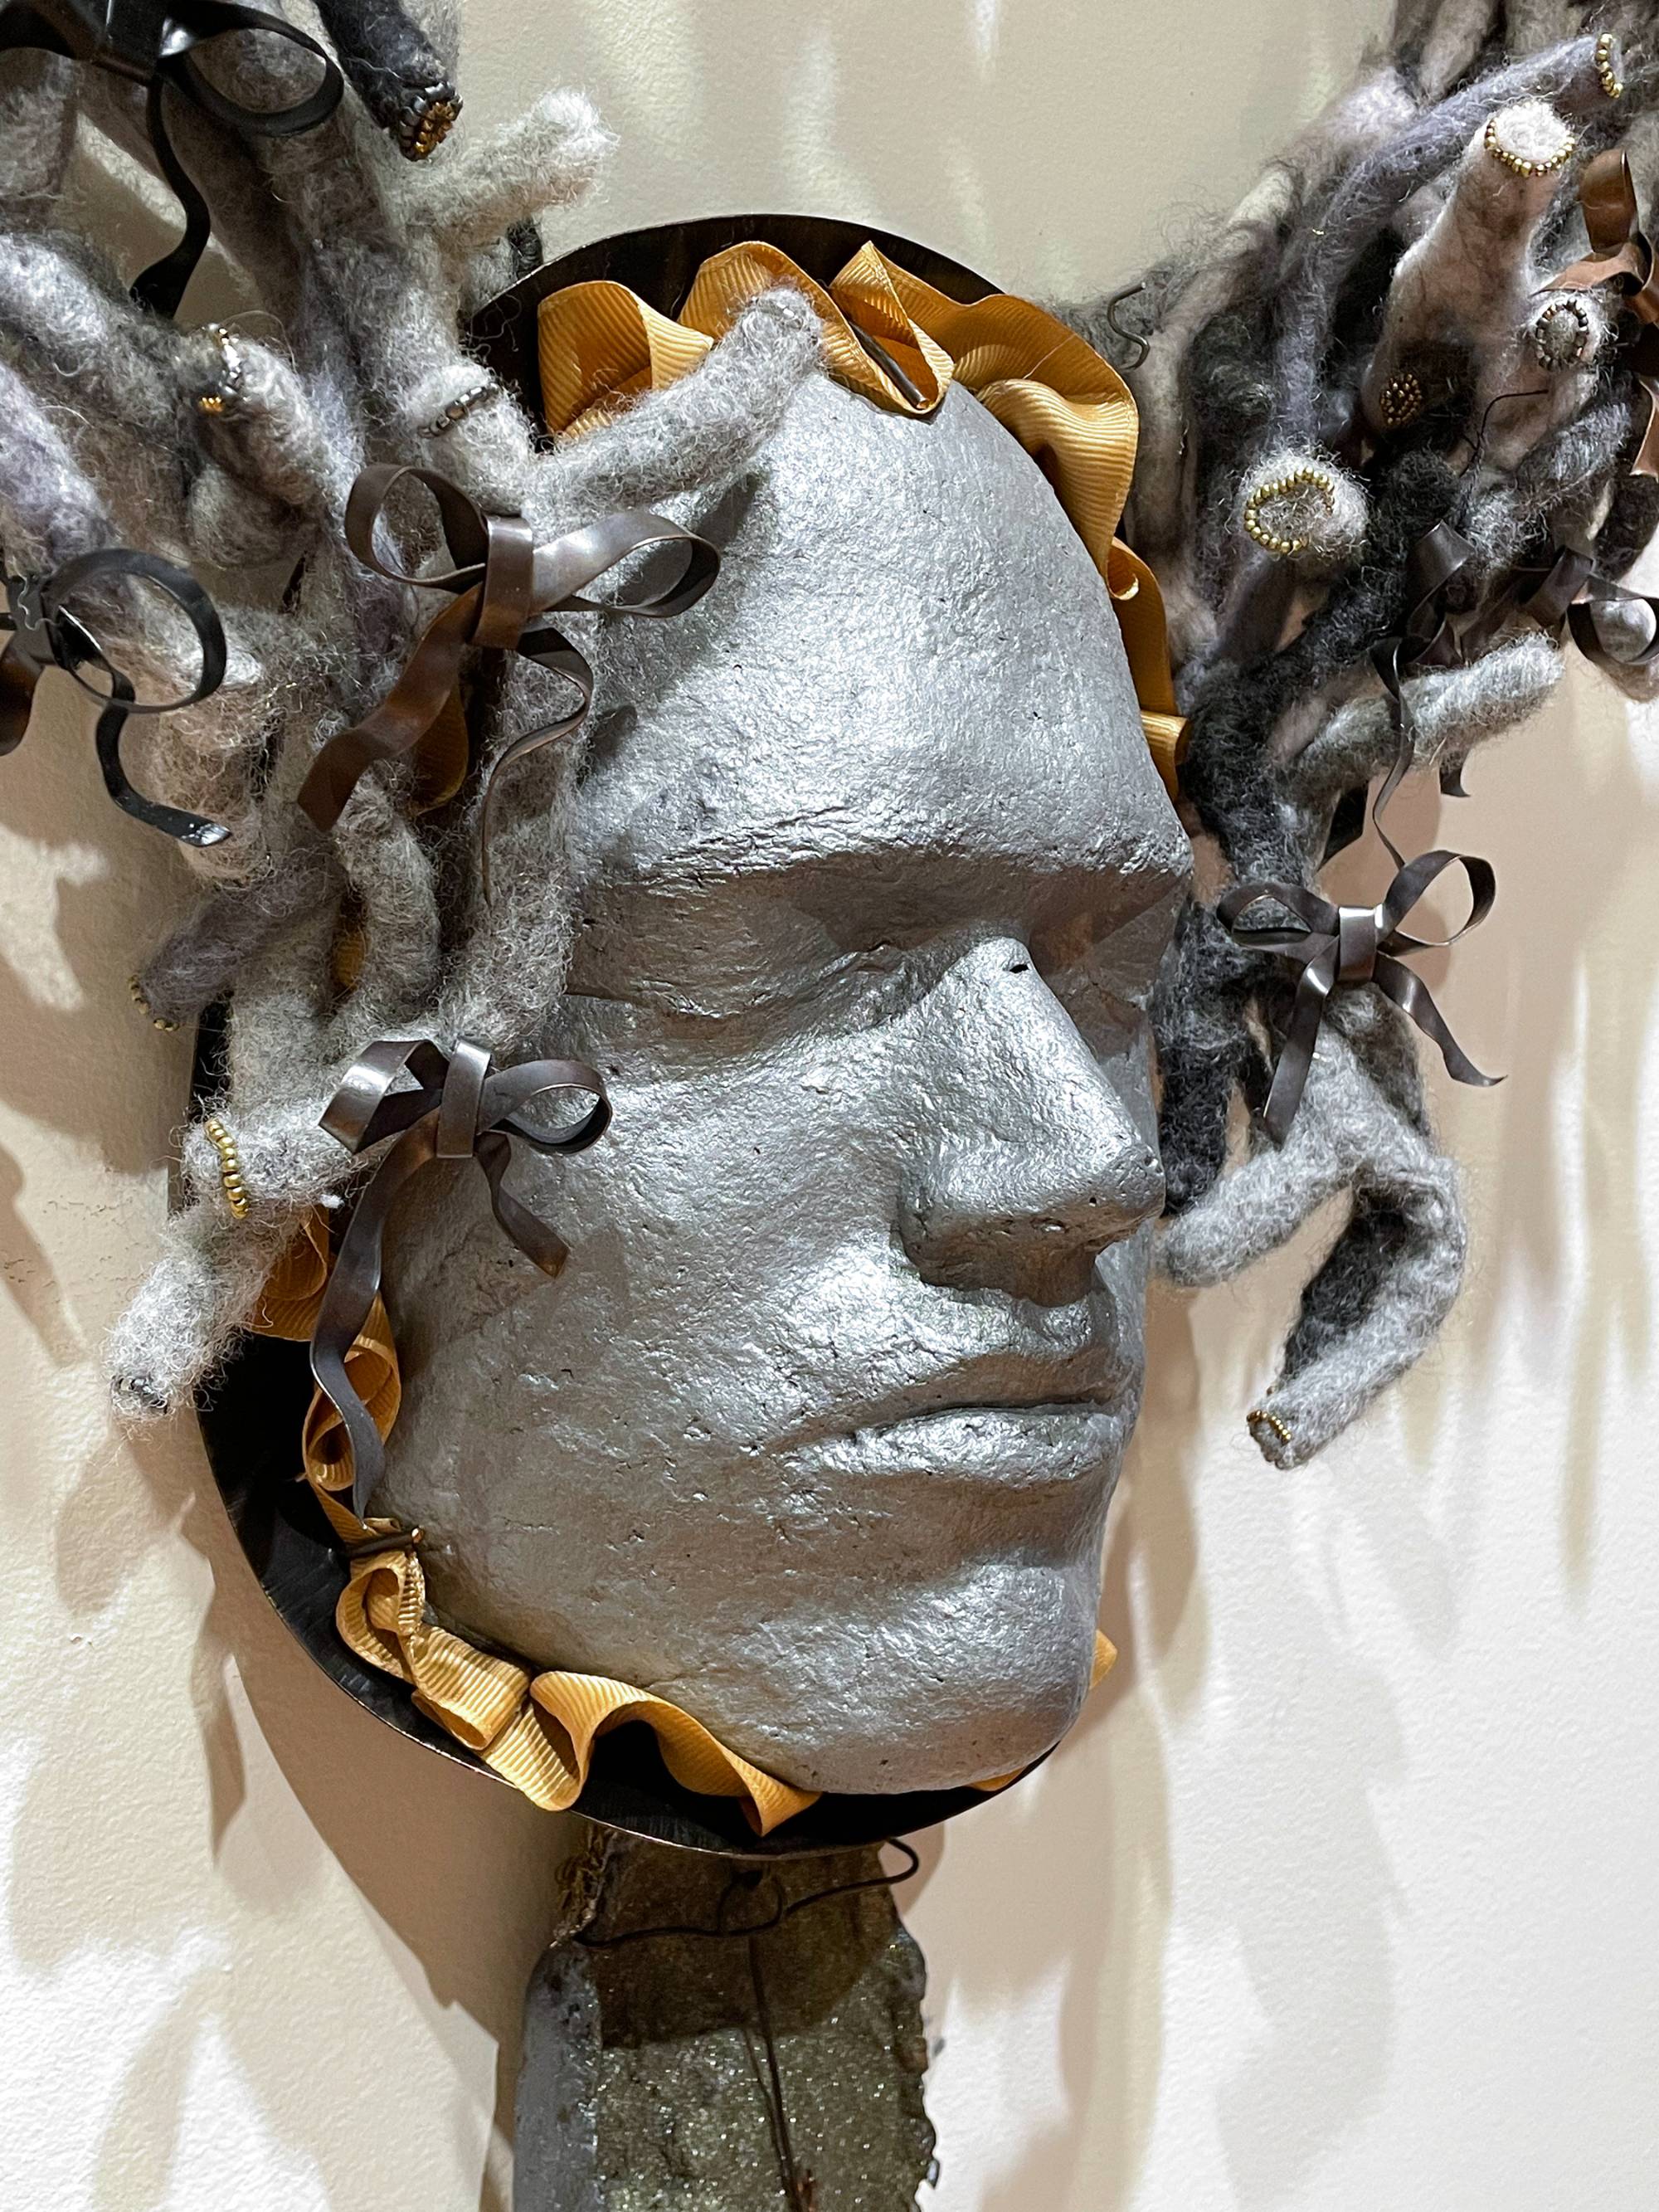 sculpture of a man's face surrounded by wool tubing